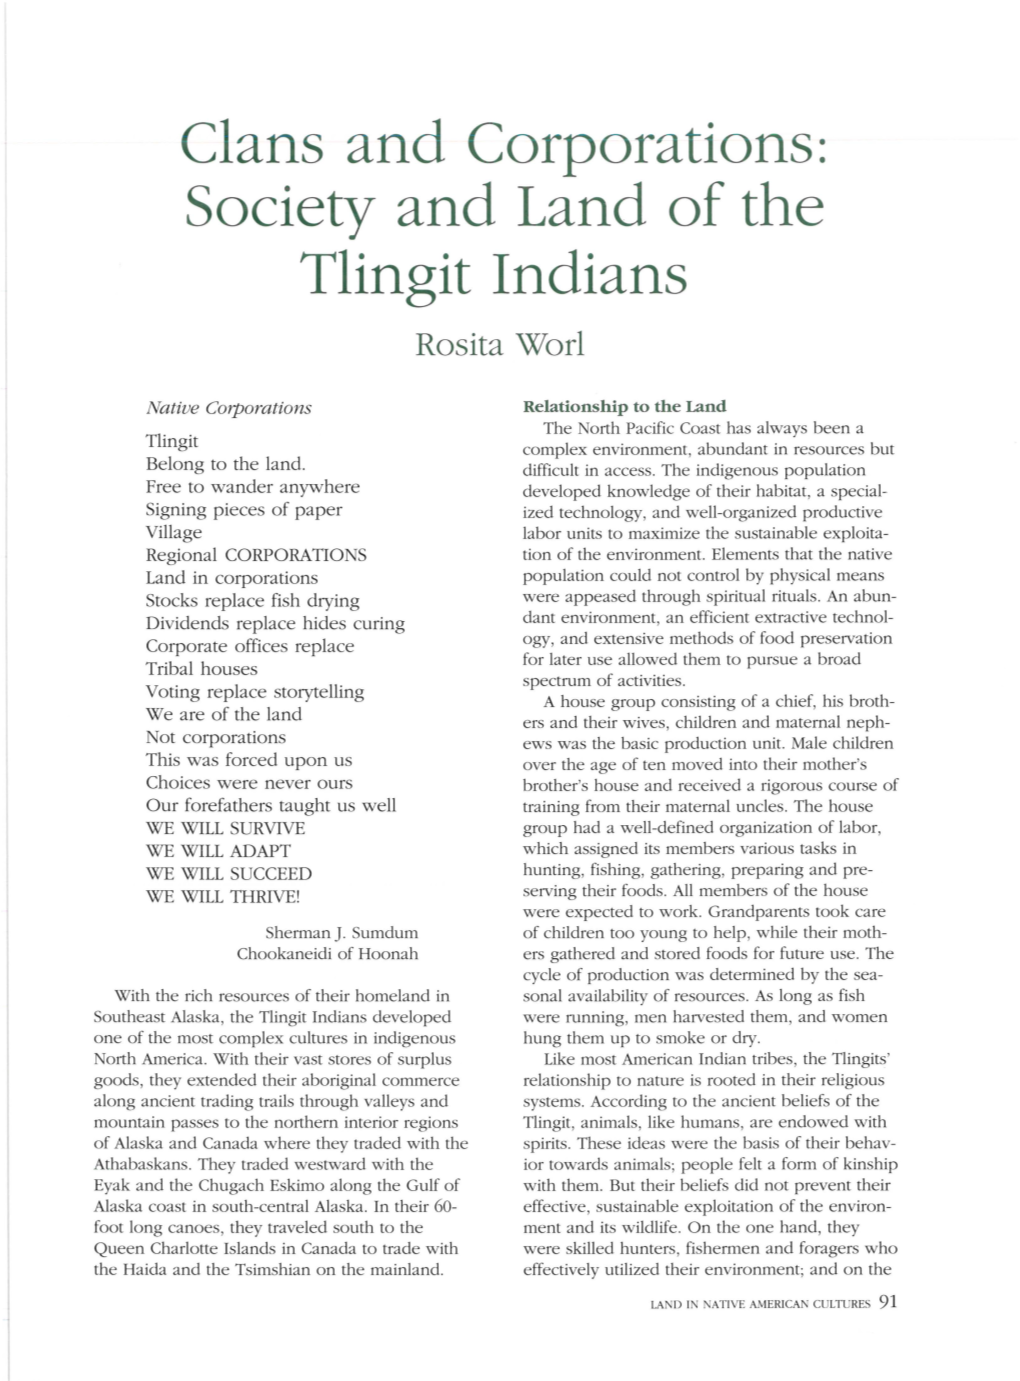 Clans and Corporations: Society and Land of the Tlingit Indians Rosita Worl